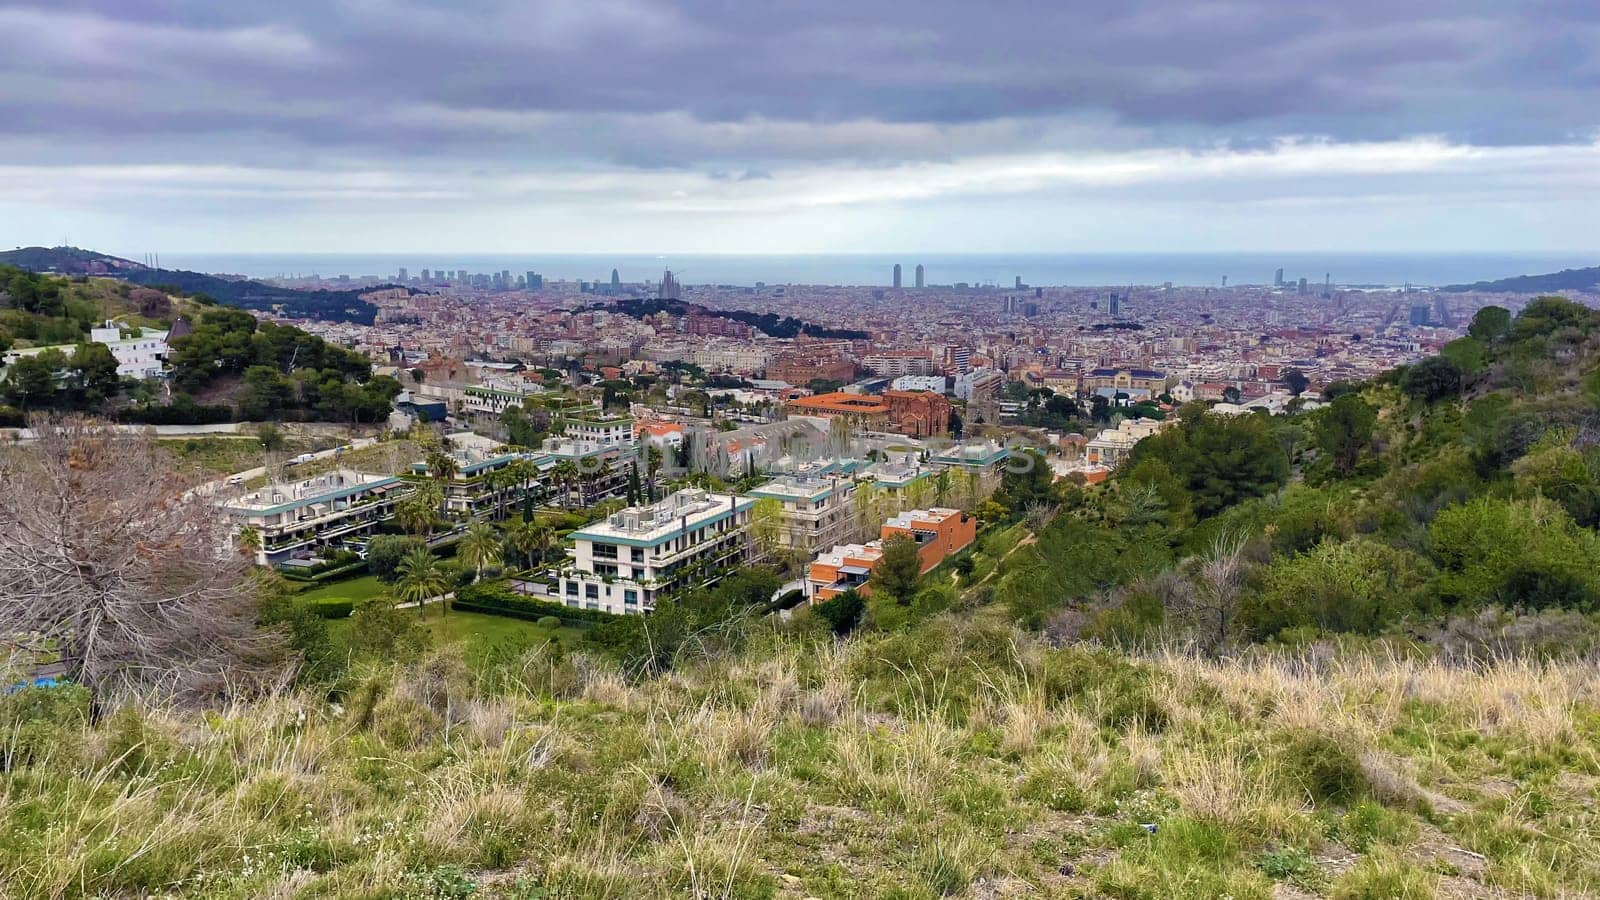 Panoramic view of Barcelona city from the hill, rainy weather landscape by Iakimova